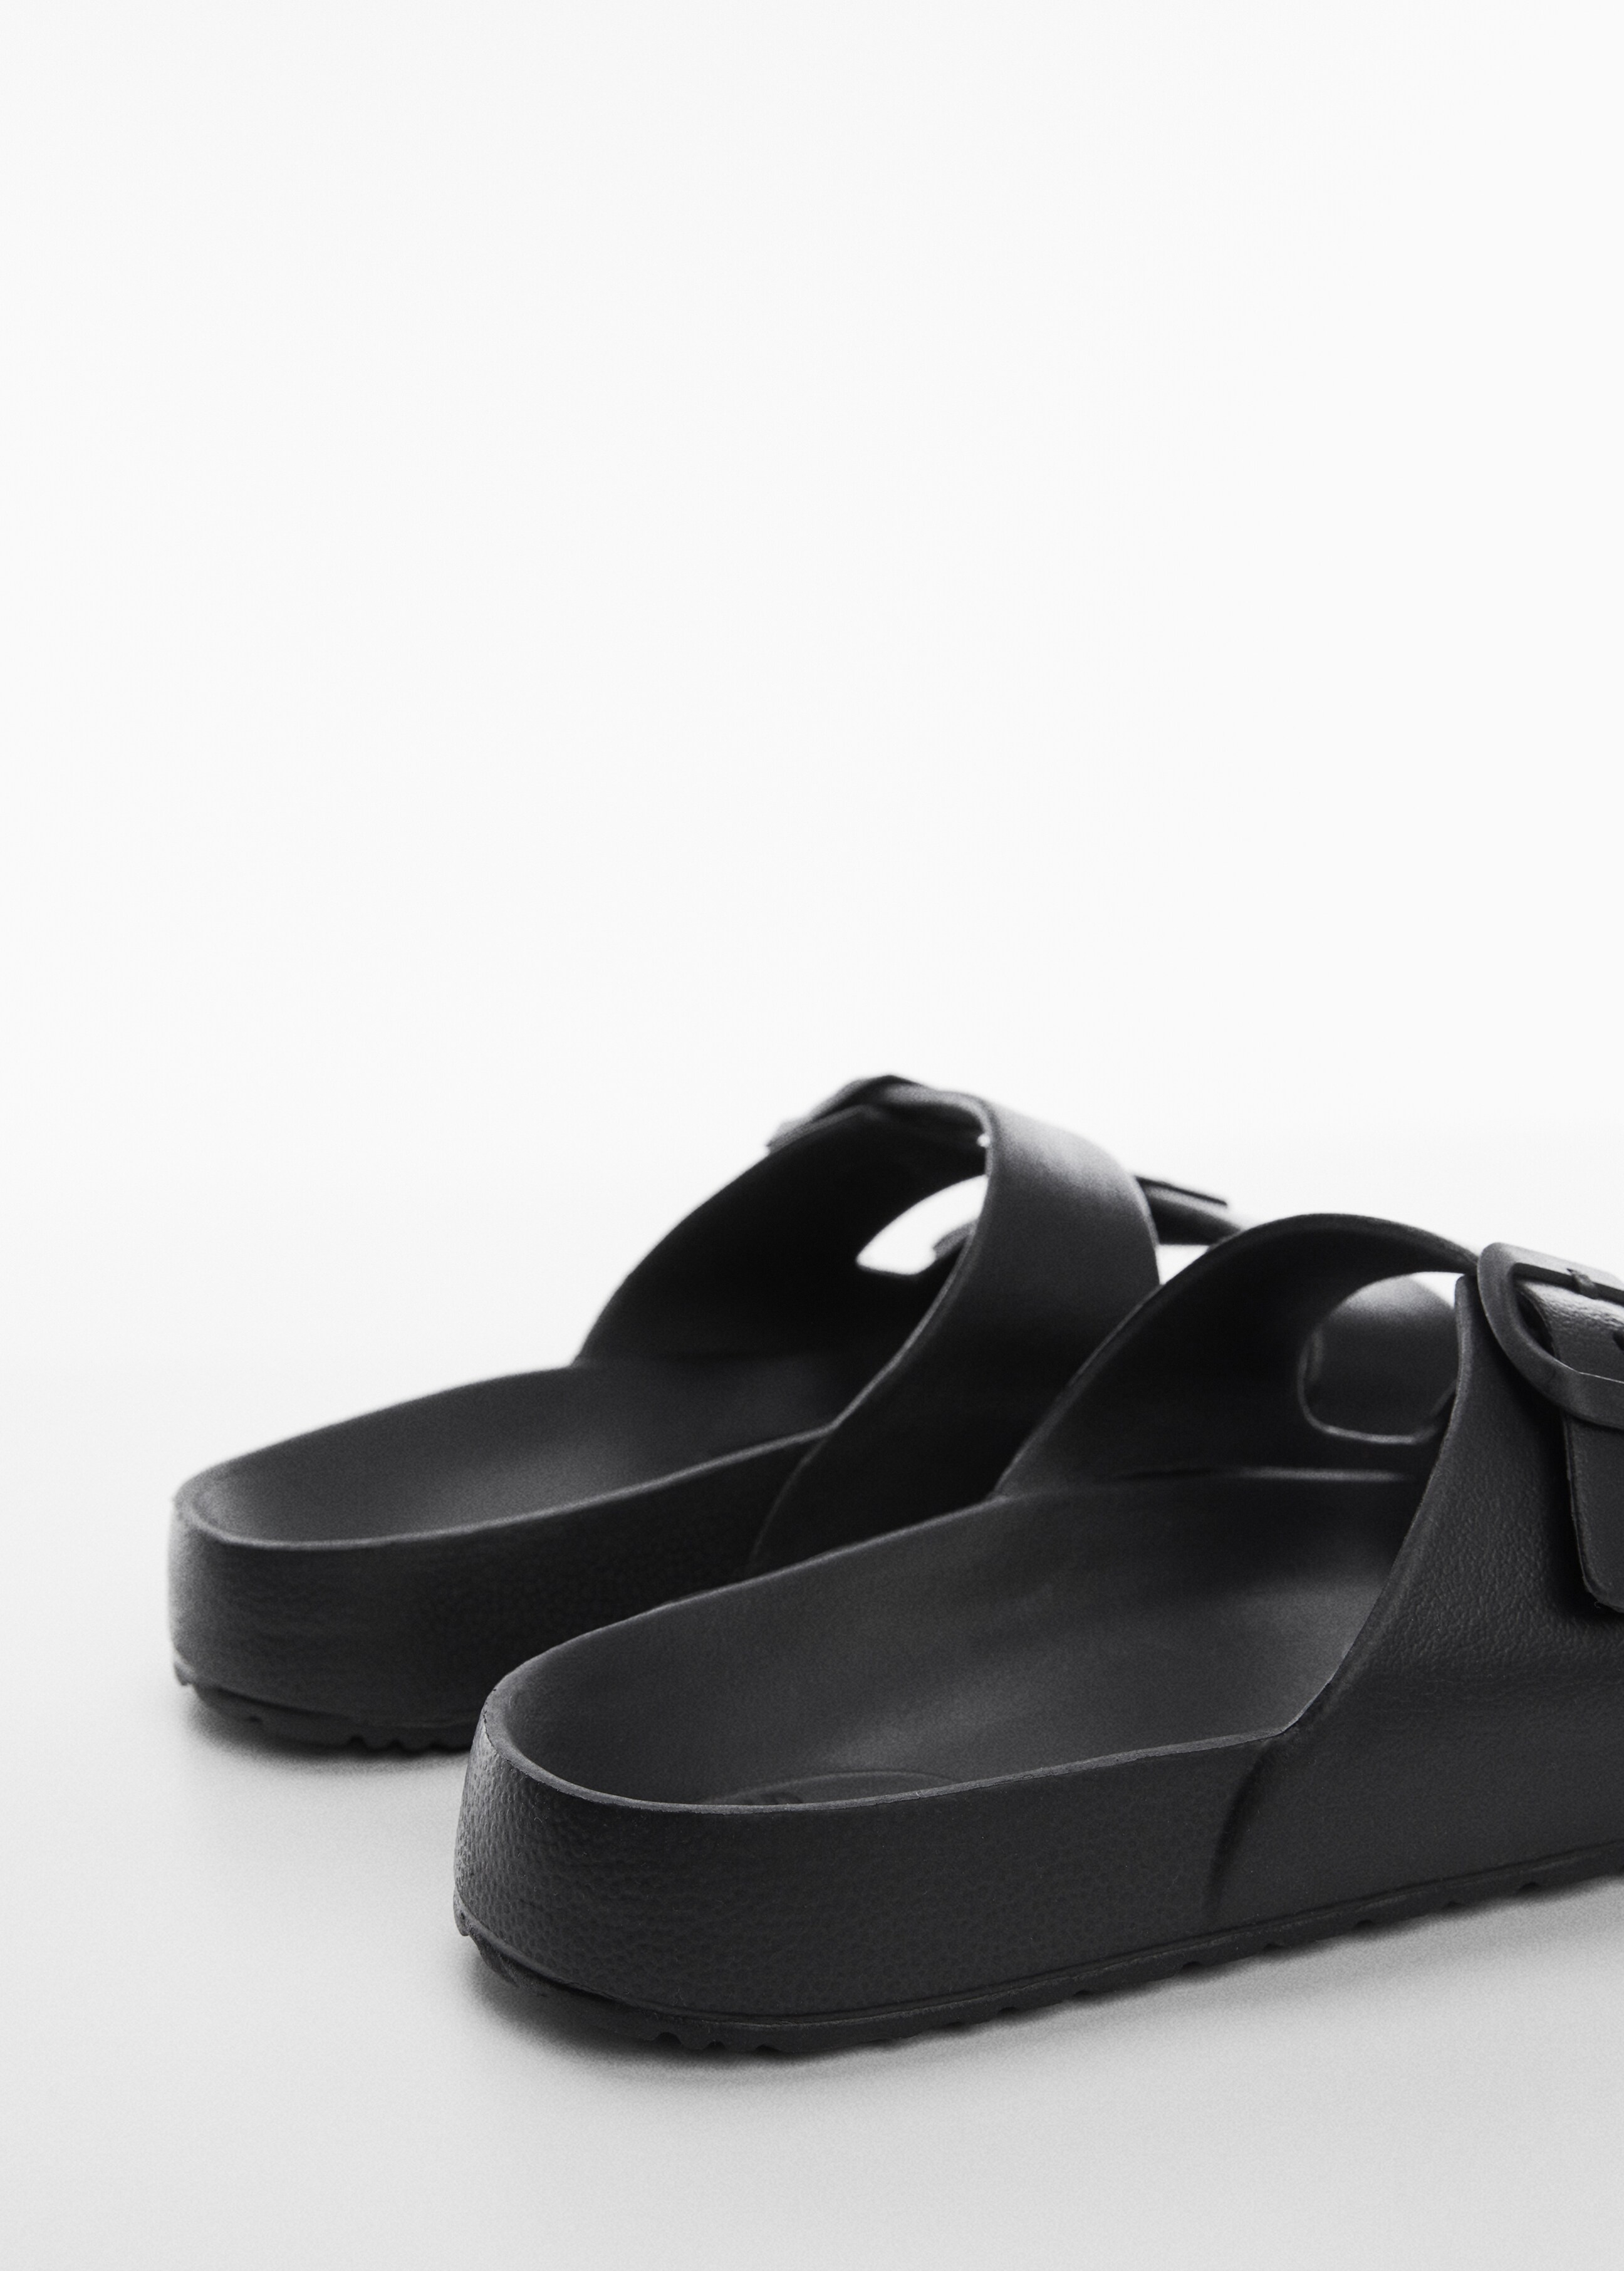 Rubber sandal with buckle - Details of the article 2